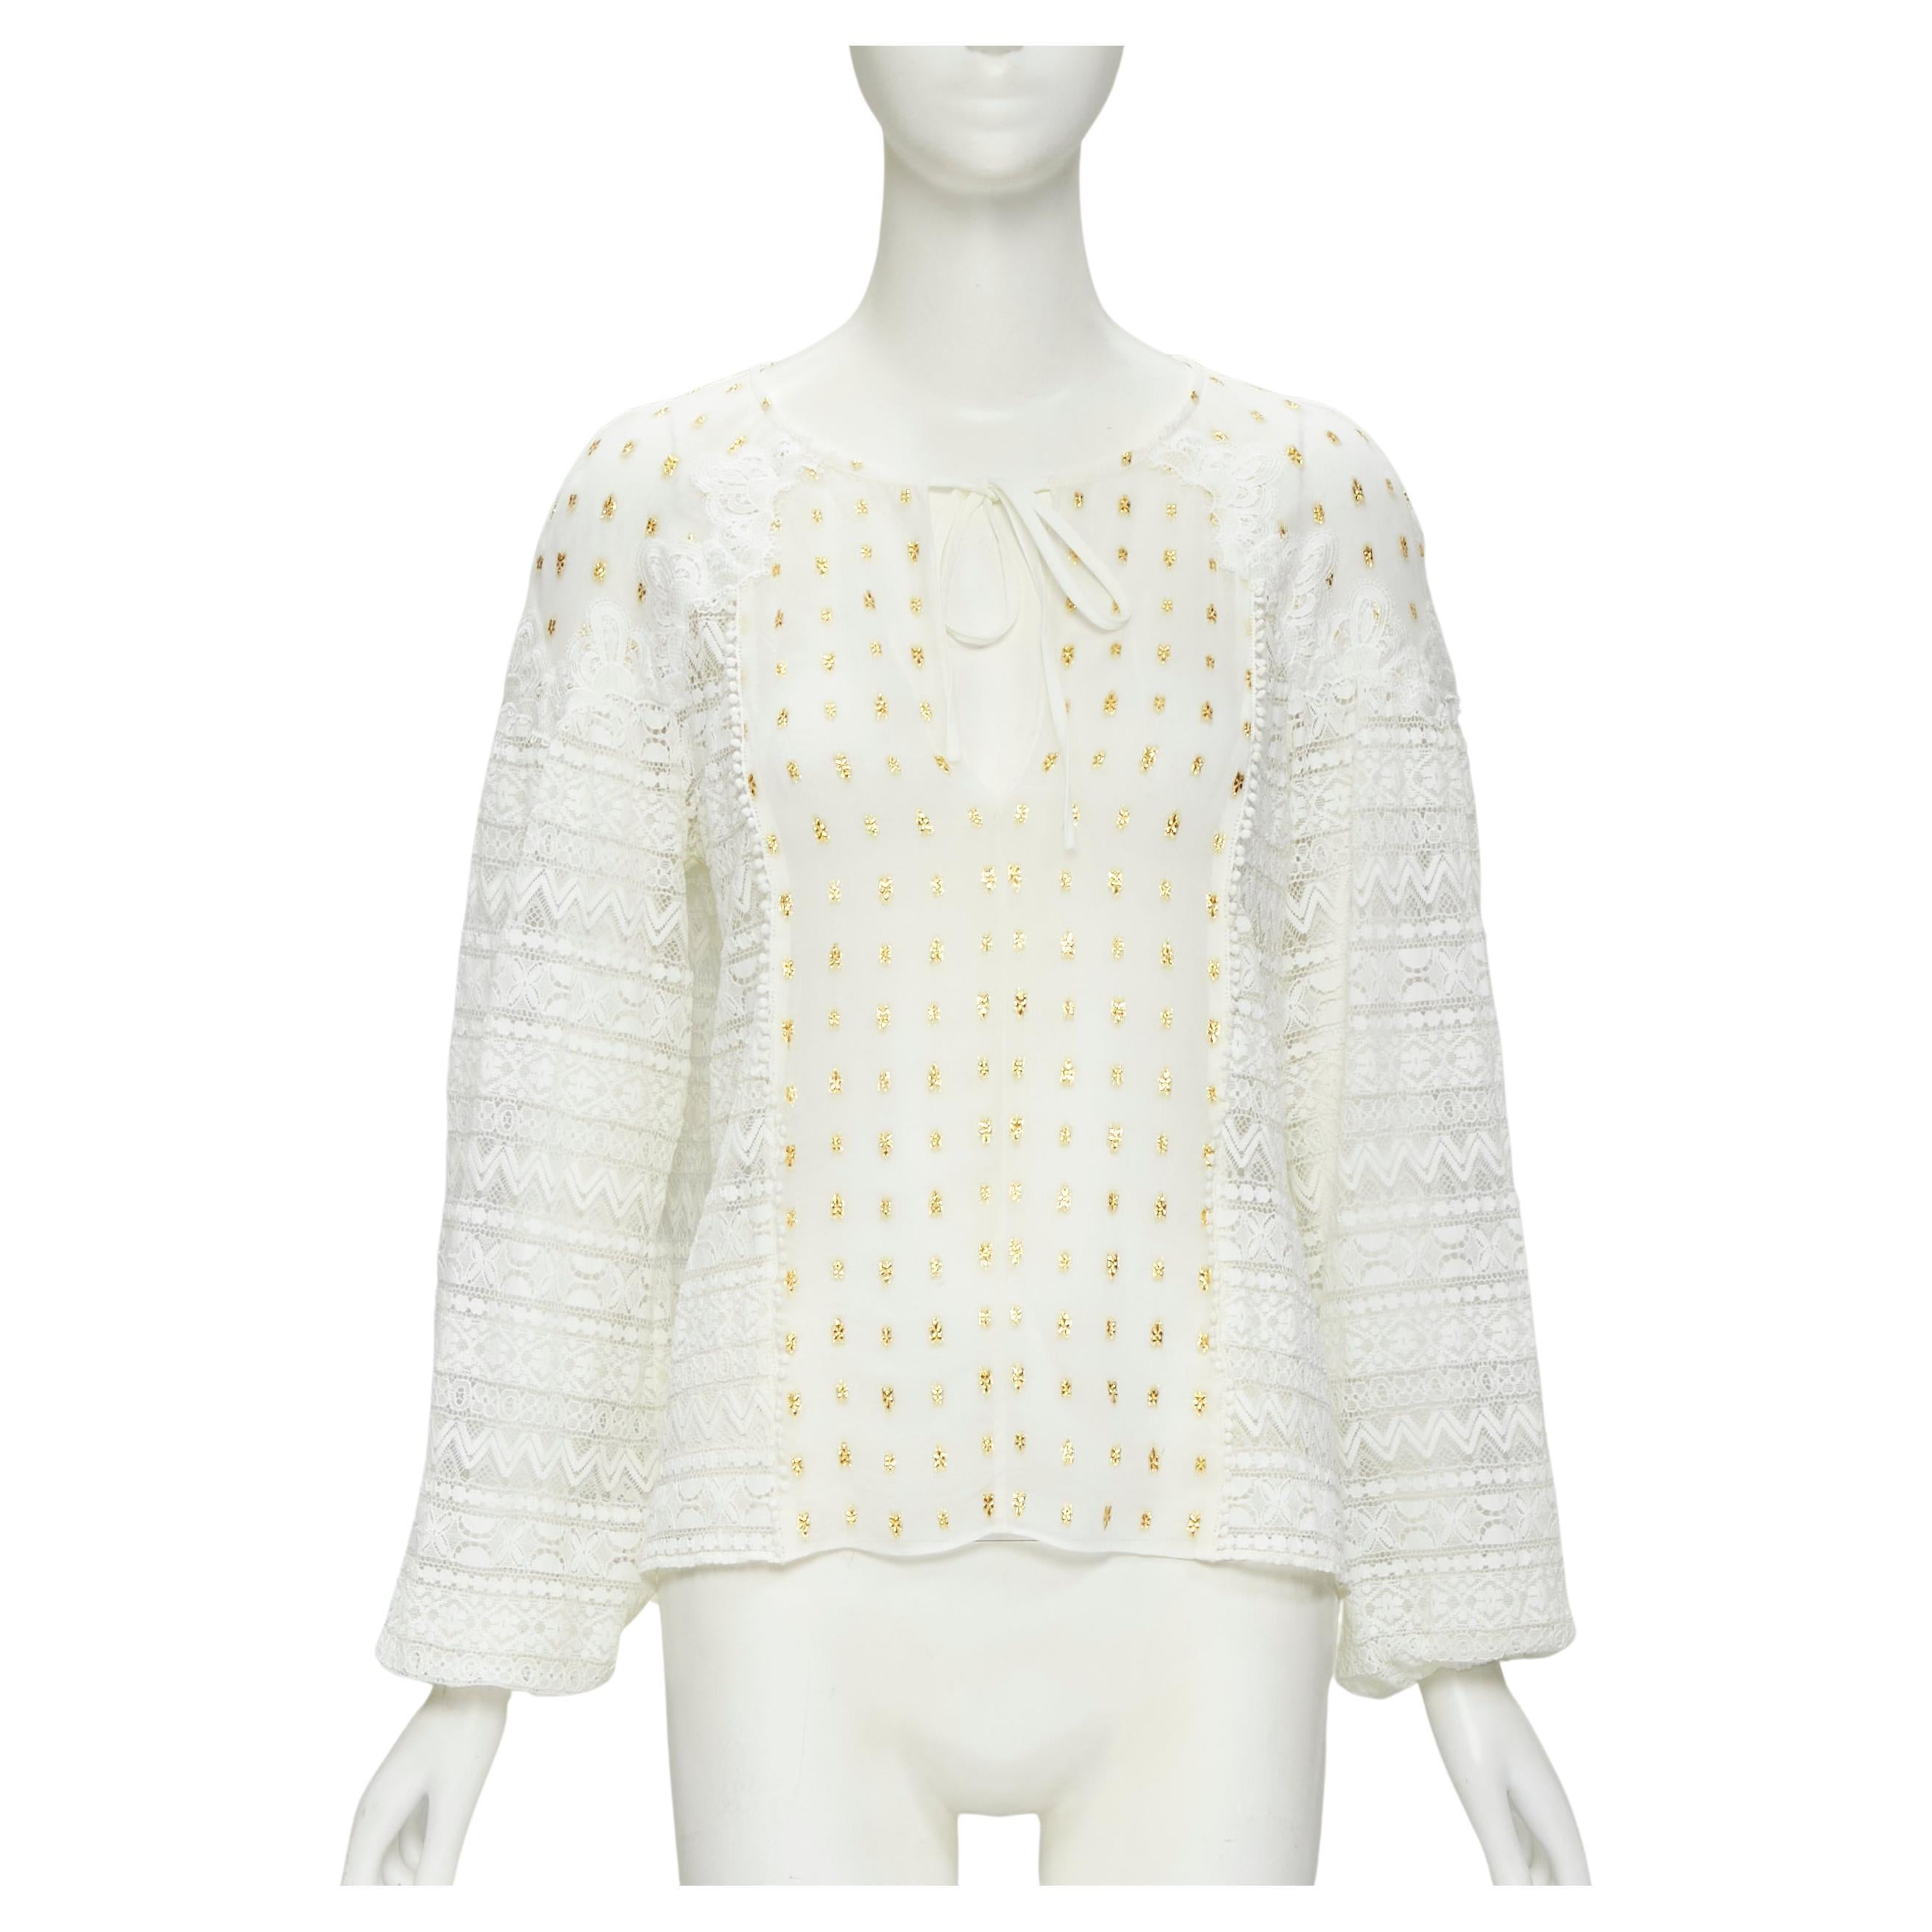 TEMPERLEY LONDON white sheer gold jacquard crochet lace bohemian top US4 S For Sale